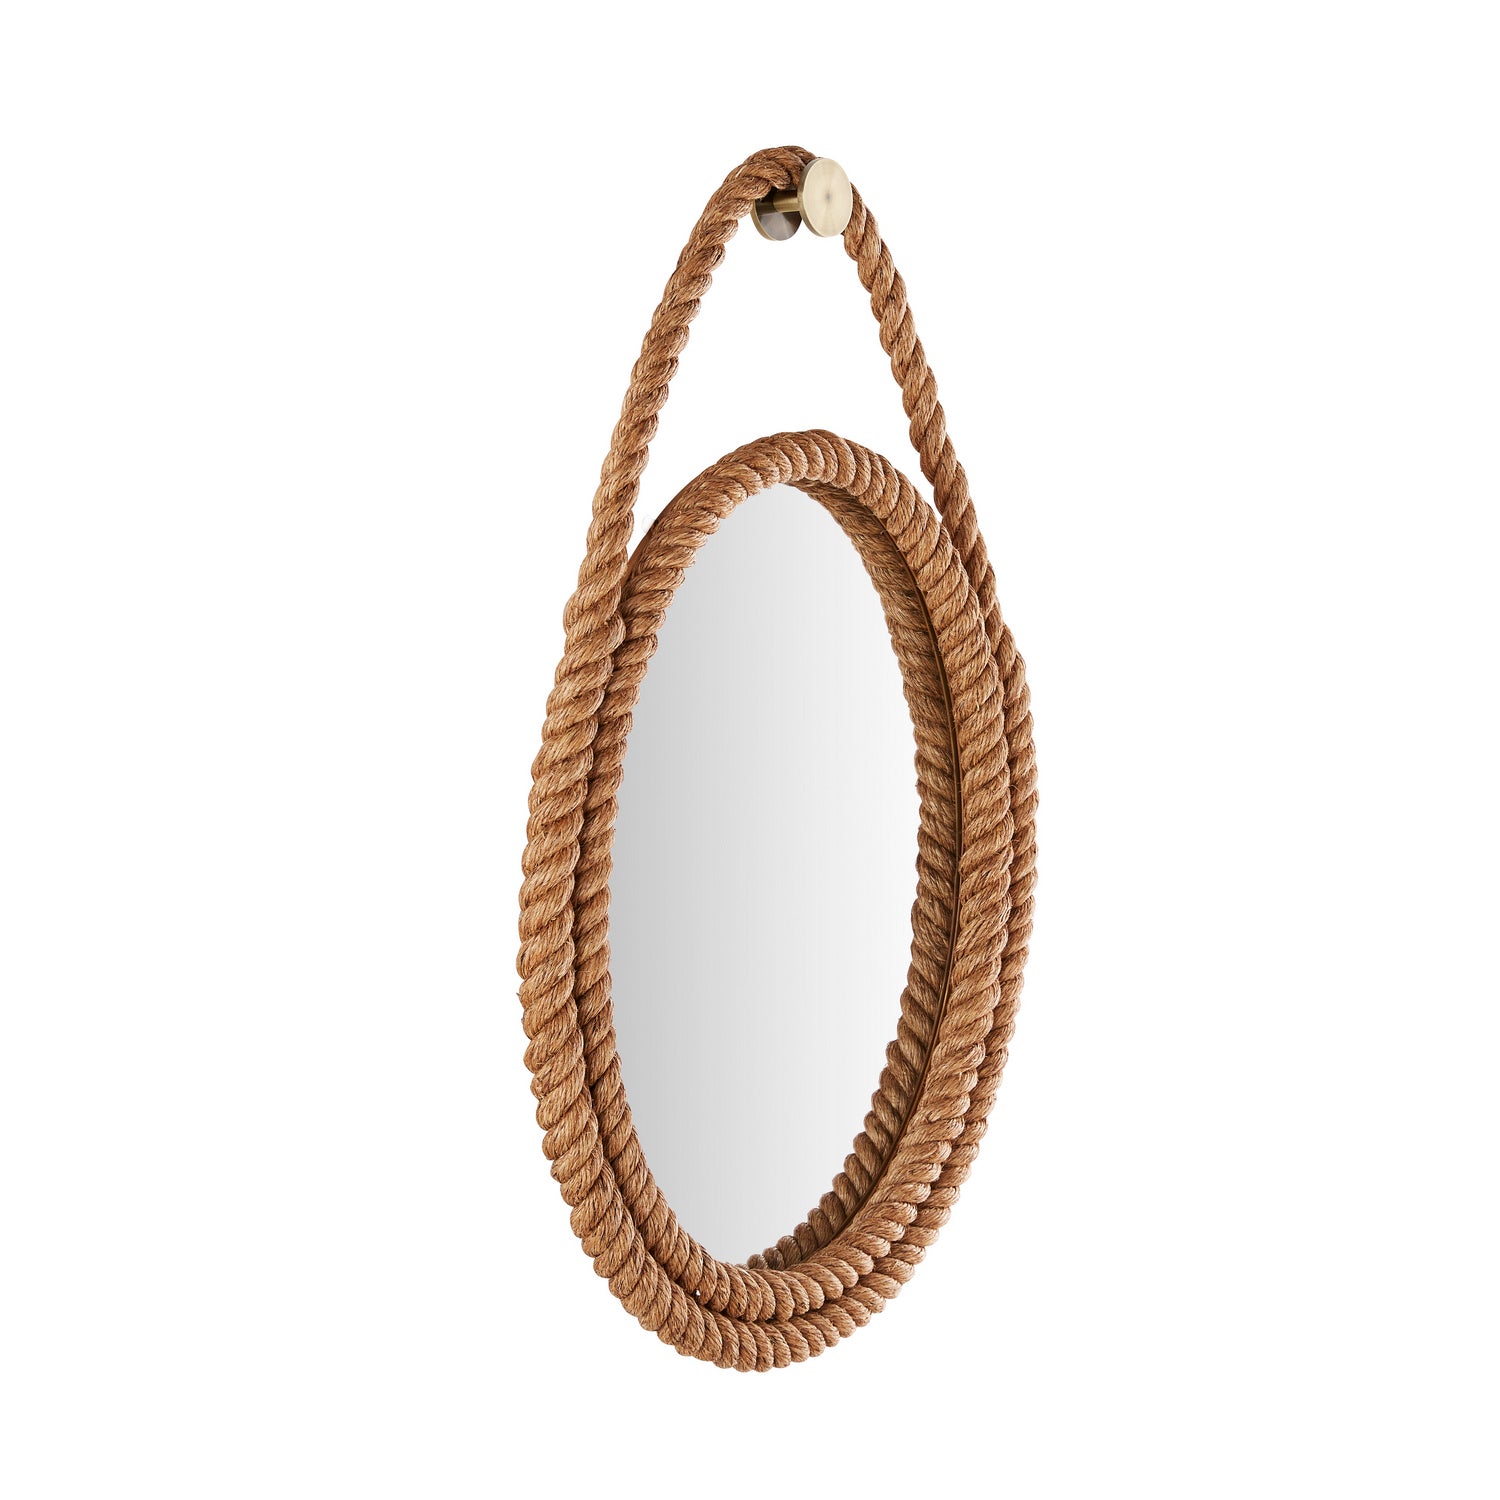 Mirror from the Iberis collection in Natural finish